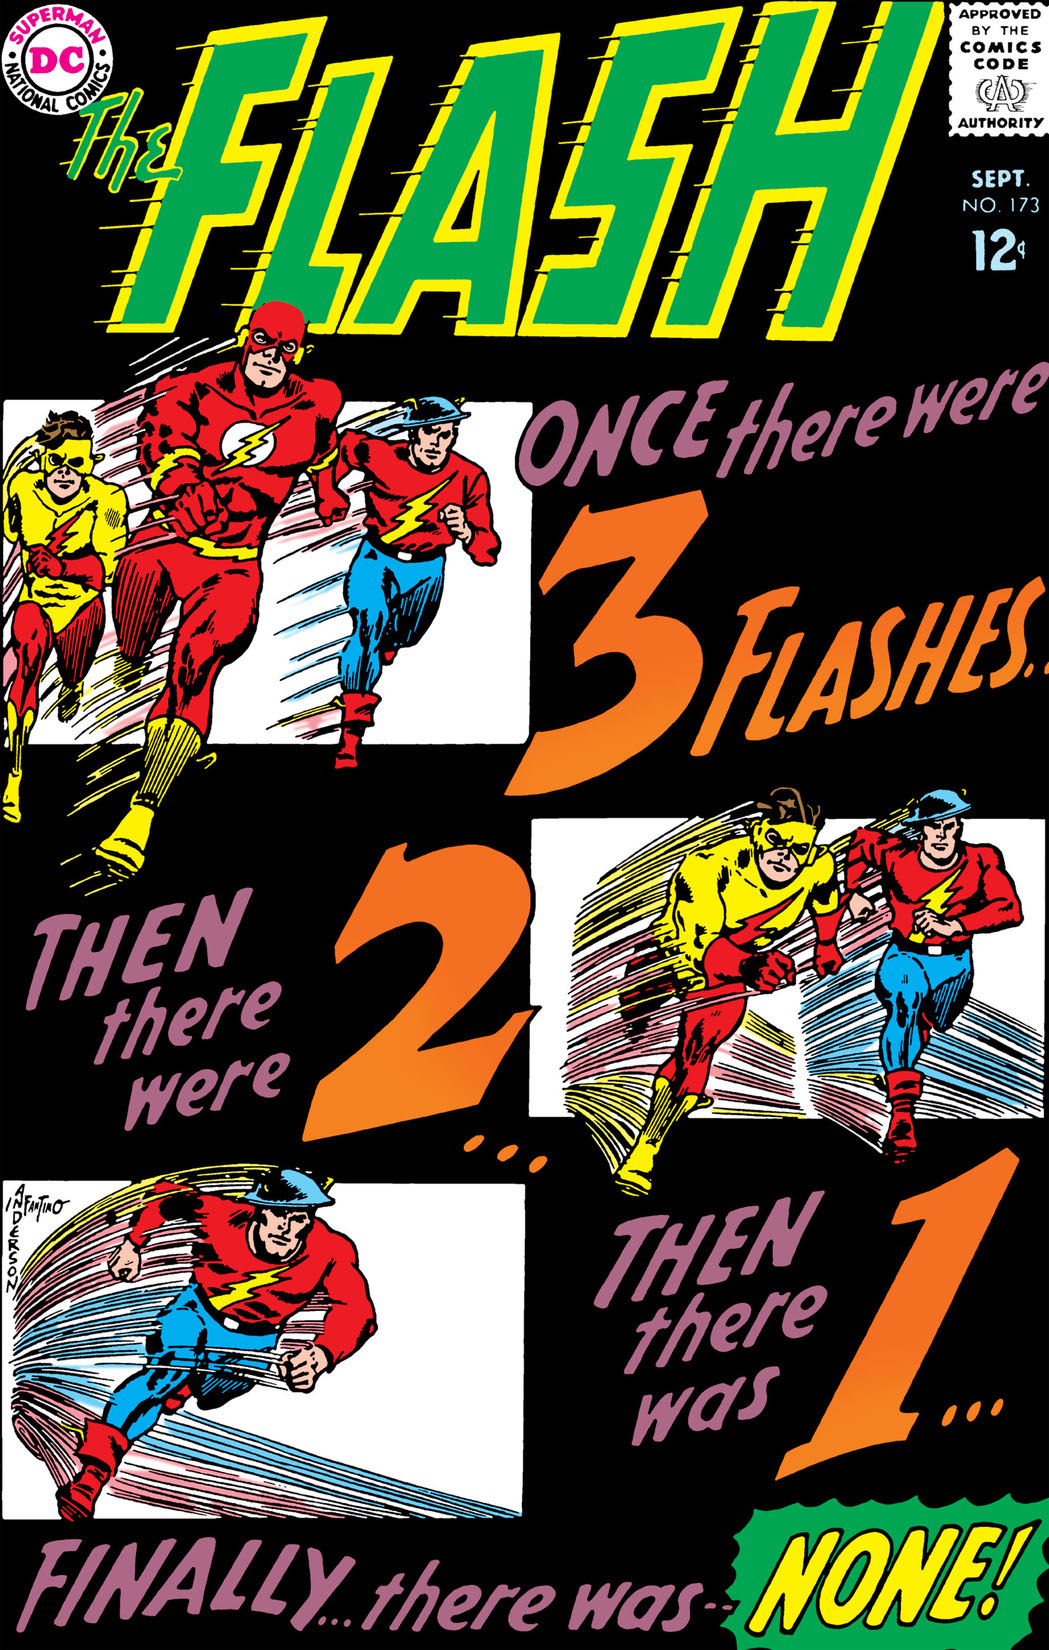 The Flash (1959-) #173 preview images